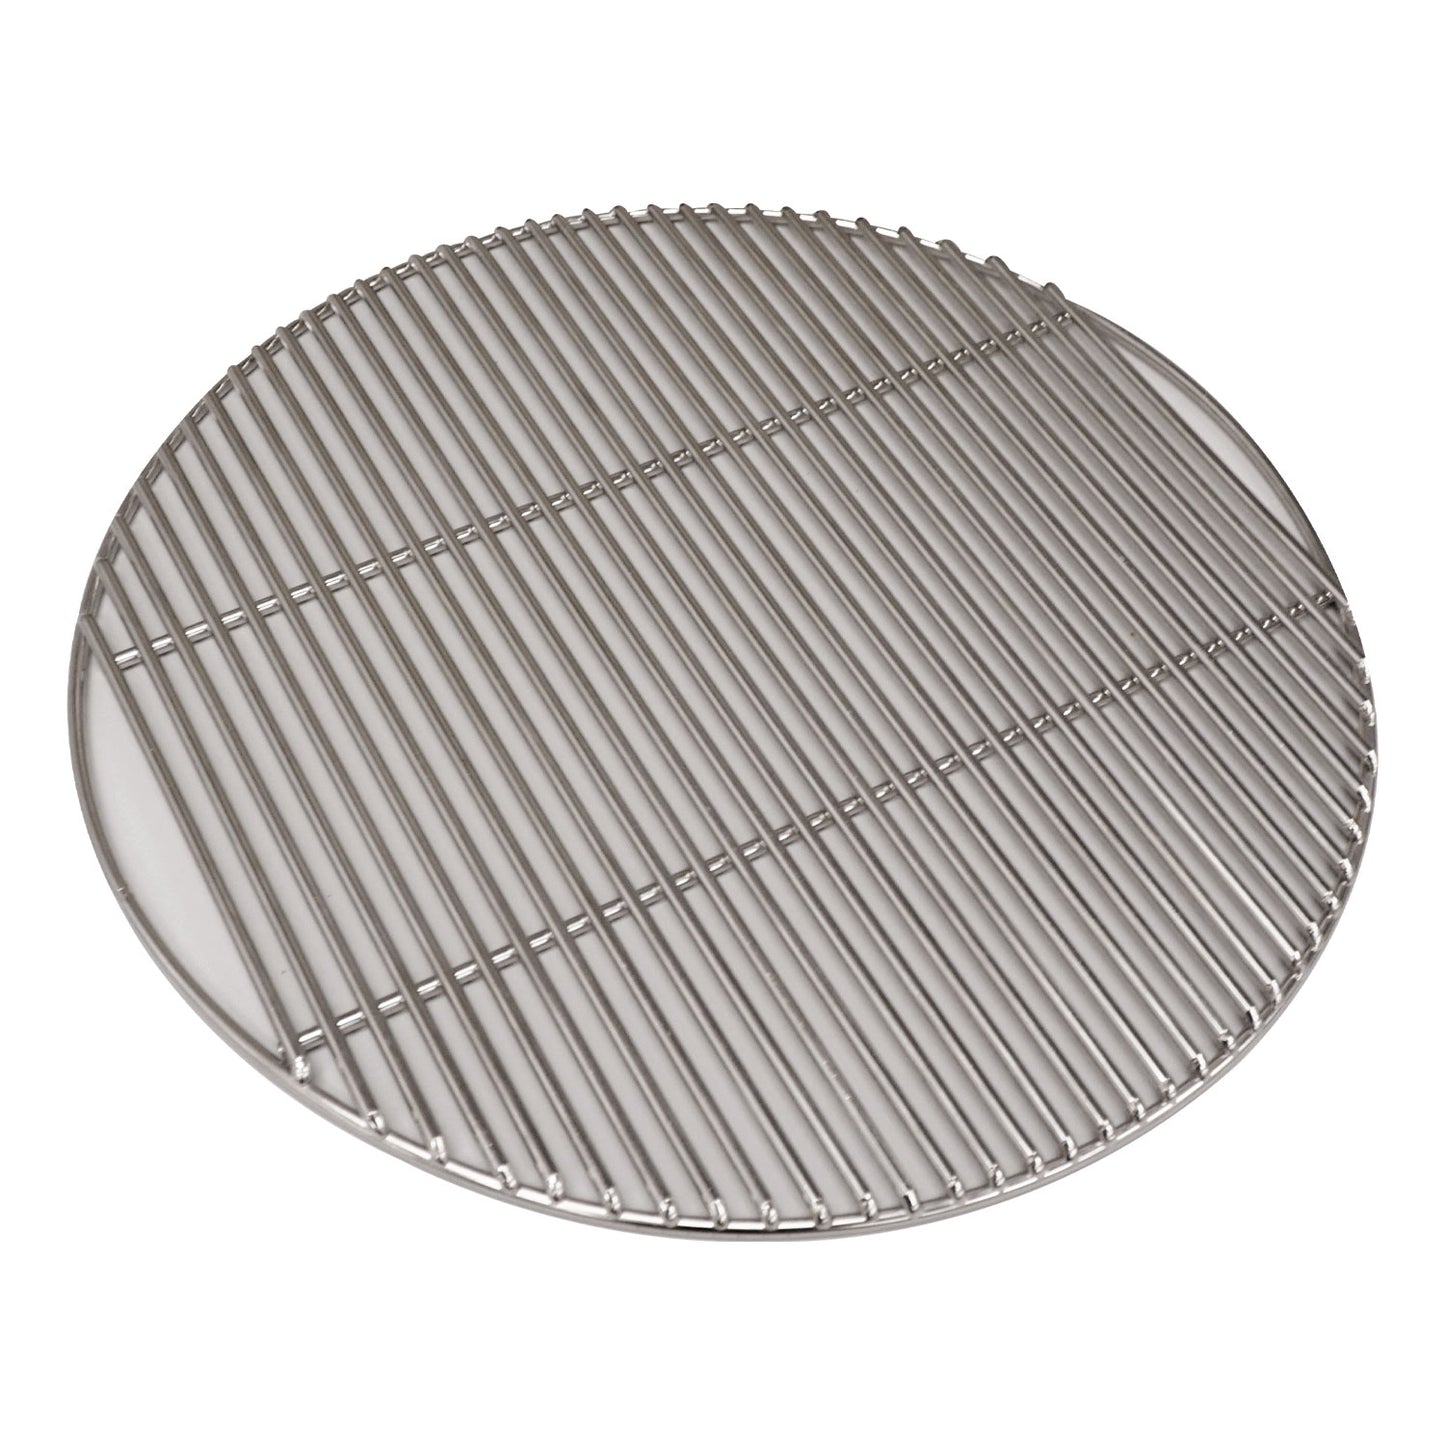 Stainless Steel Grill Grate